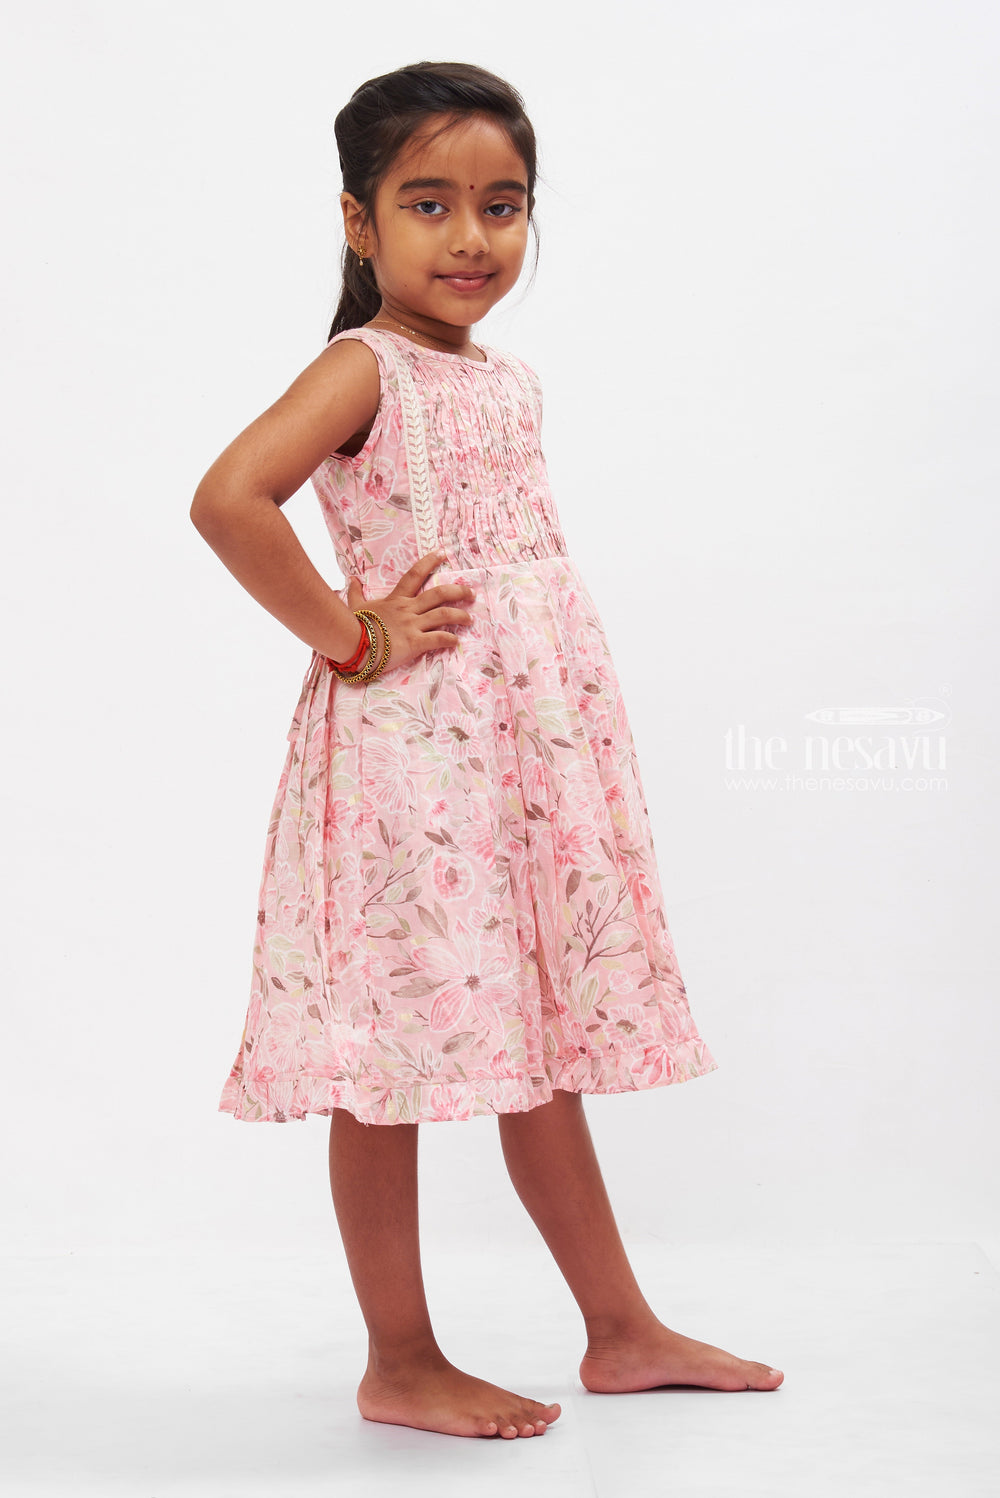 The Nesavu Girls Cotton Frock Vintage Floral Chanderi Frock for Girls: Romantic Pink with Lace Detailing Nesavu Romantic Pink Floral Chanderi Frock | Girls' Vintage Lace Dress | The Nesavu